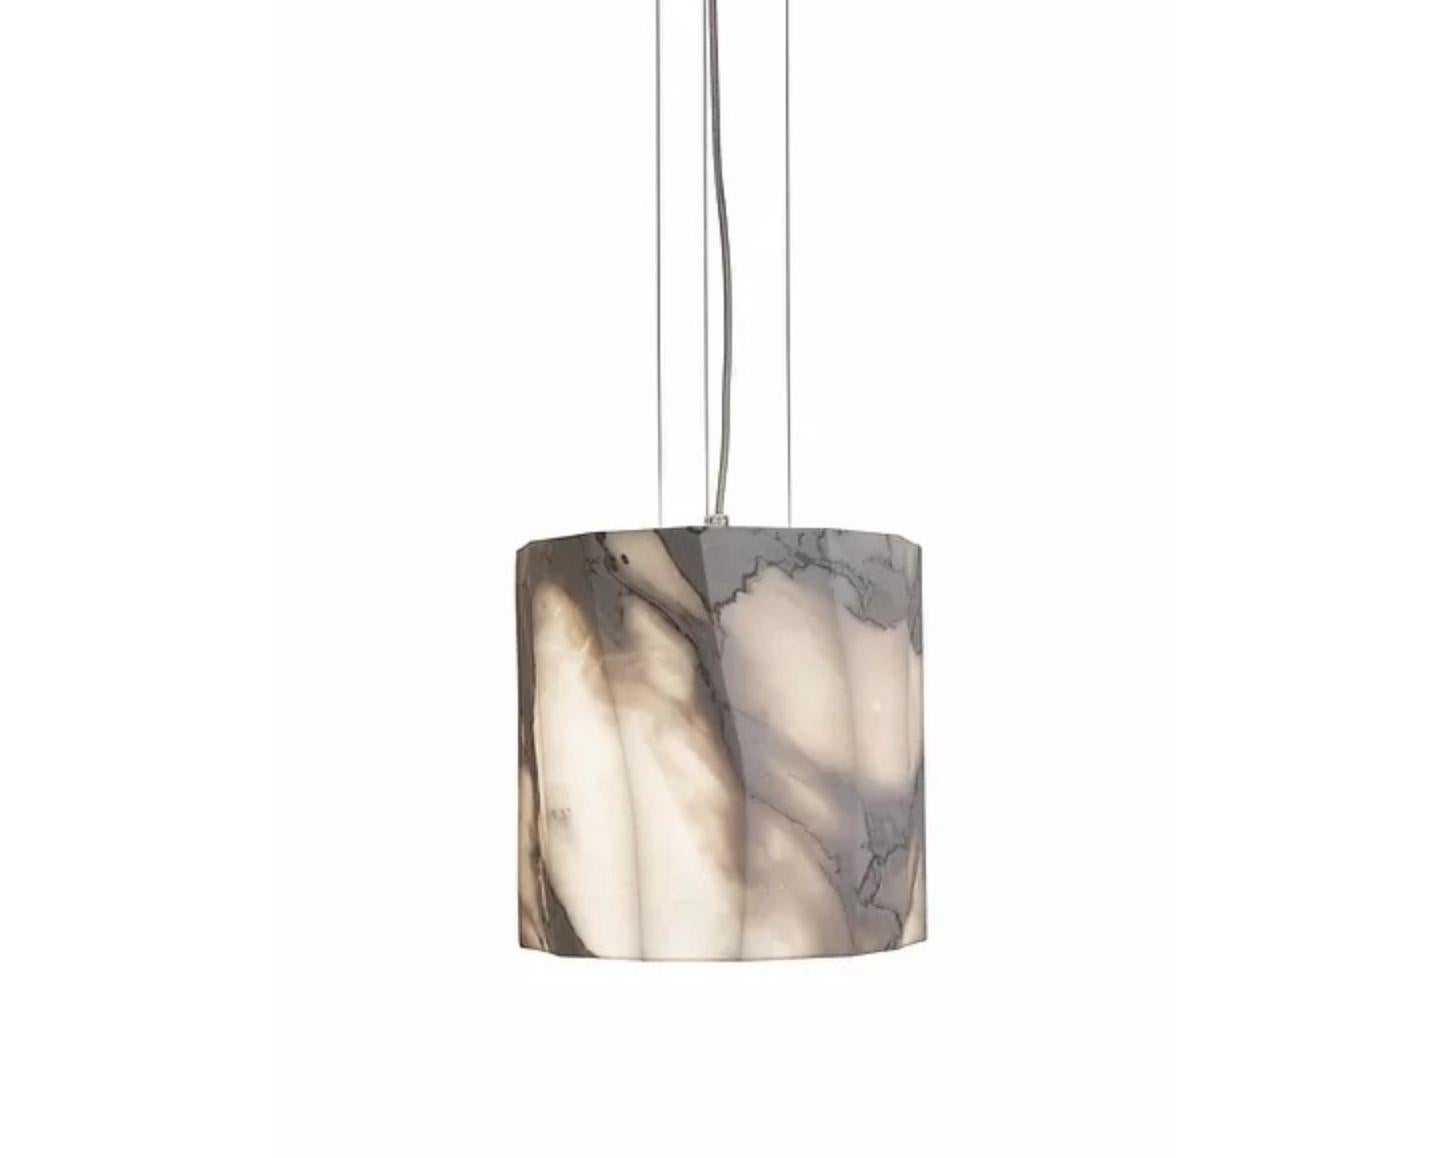 Fiamma large marble pendant by Marmi Serafini
Materials: Calacatta marble
Dimensions: Ø 25, H 25 cm

All our lamps can be wired according to each country. If sold to the USA it will be wired for the USA for instance.

The stone material of